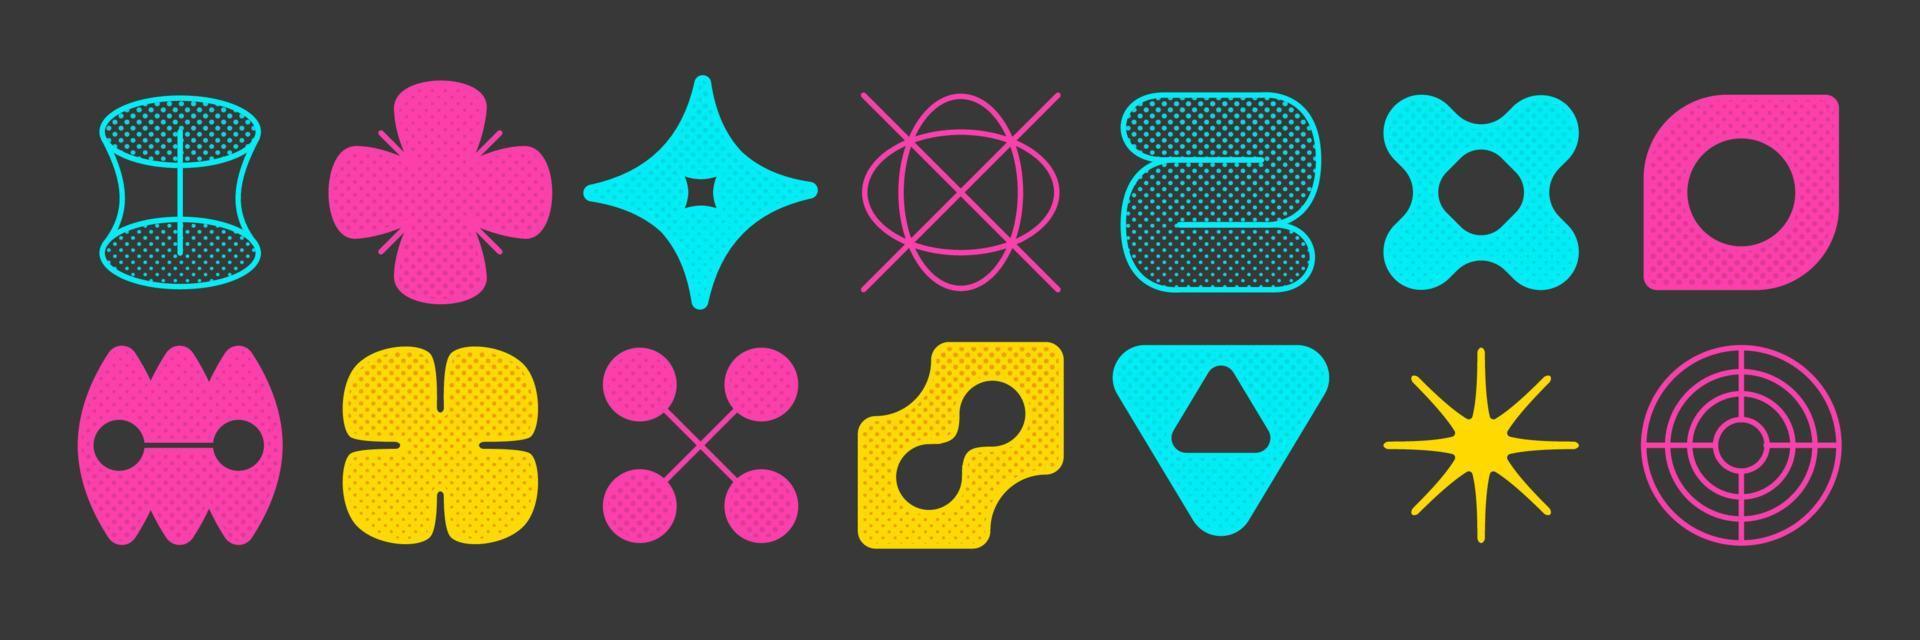 Set of colorful brutalism shapes isolated on black vector